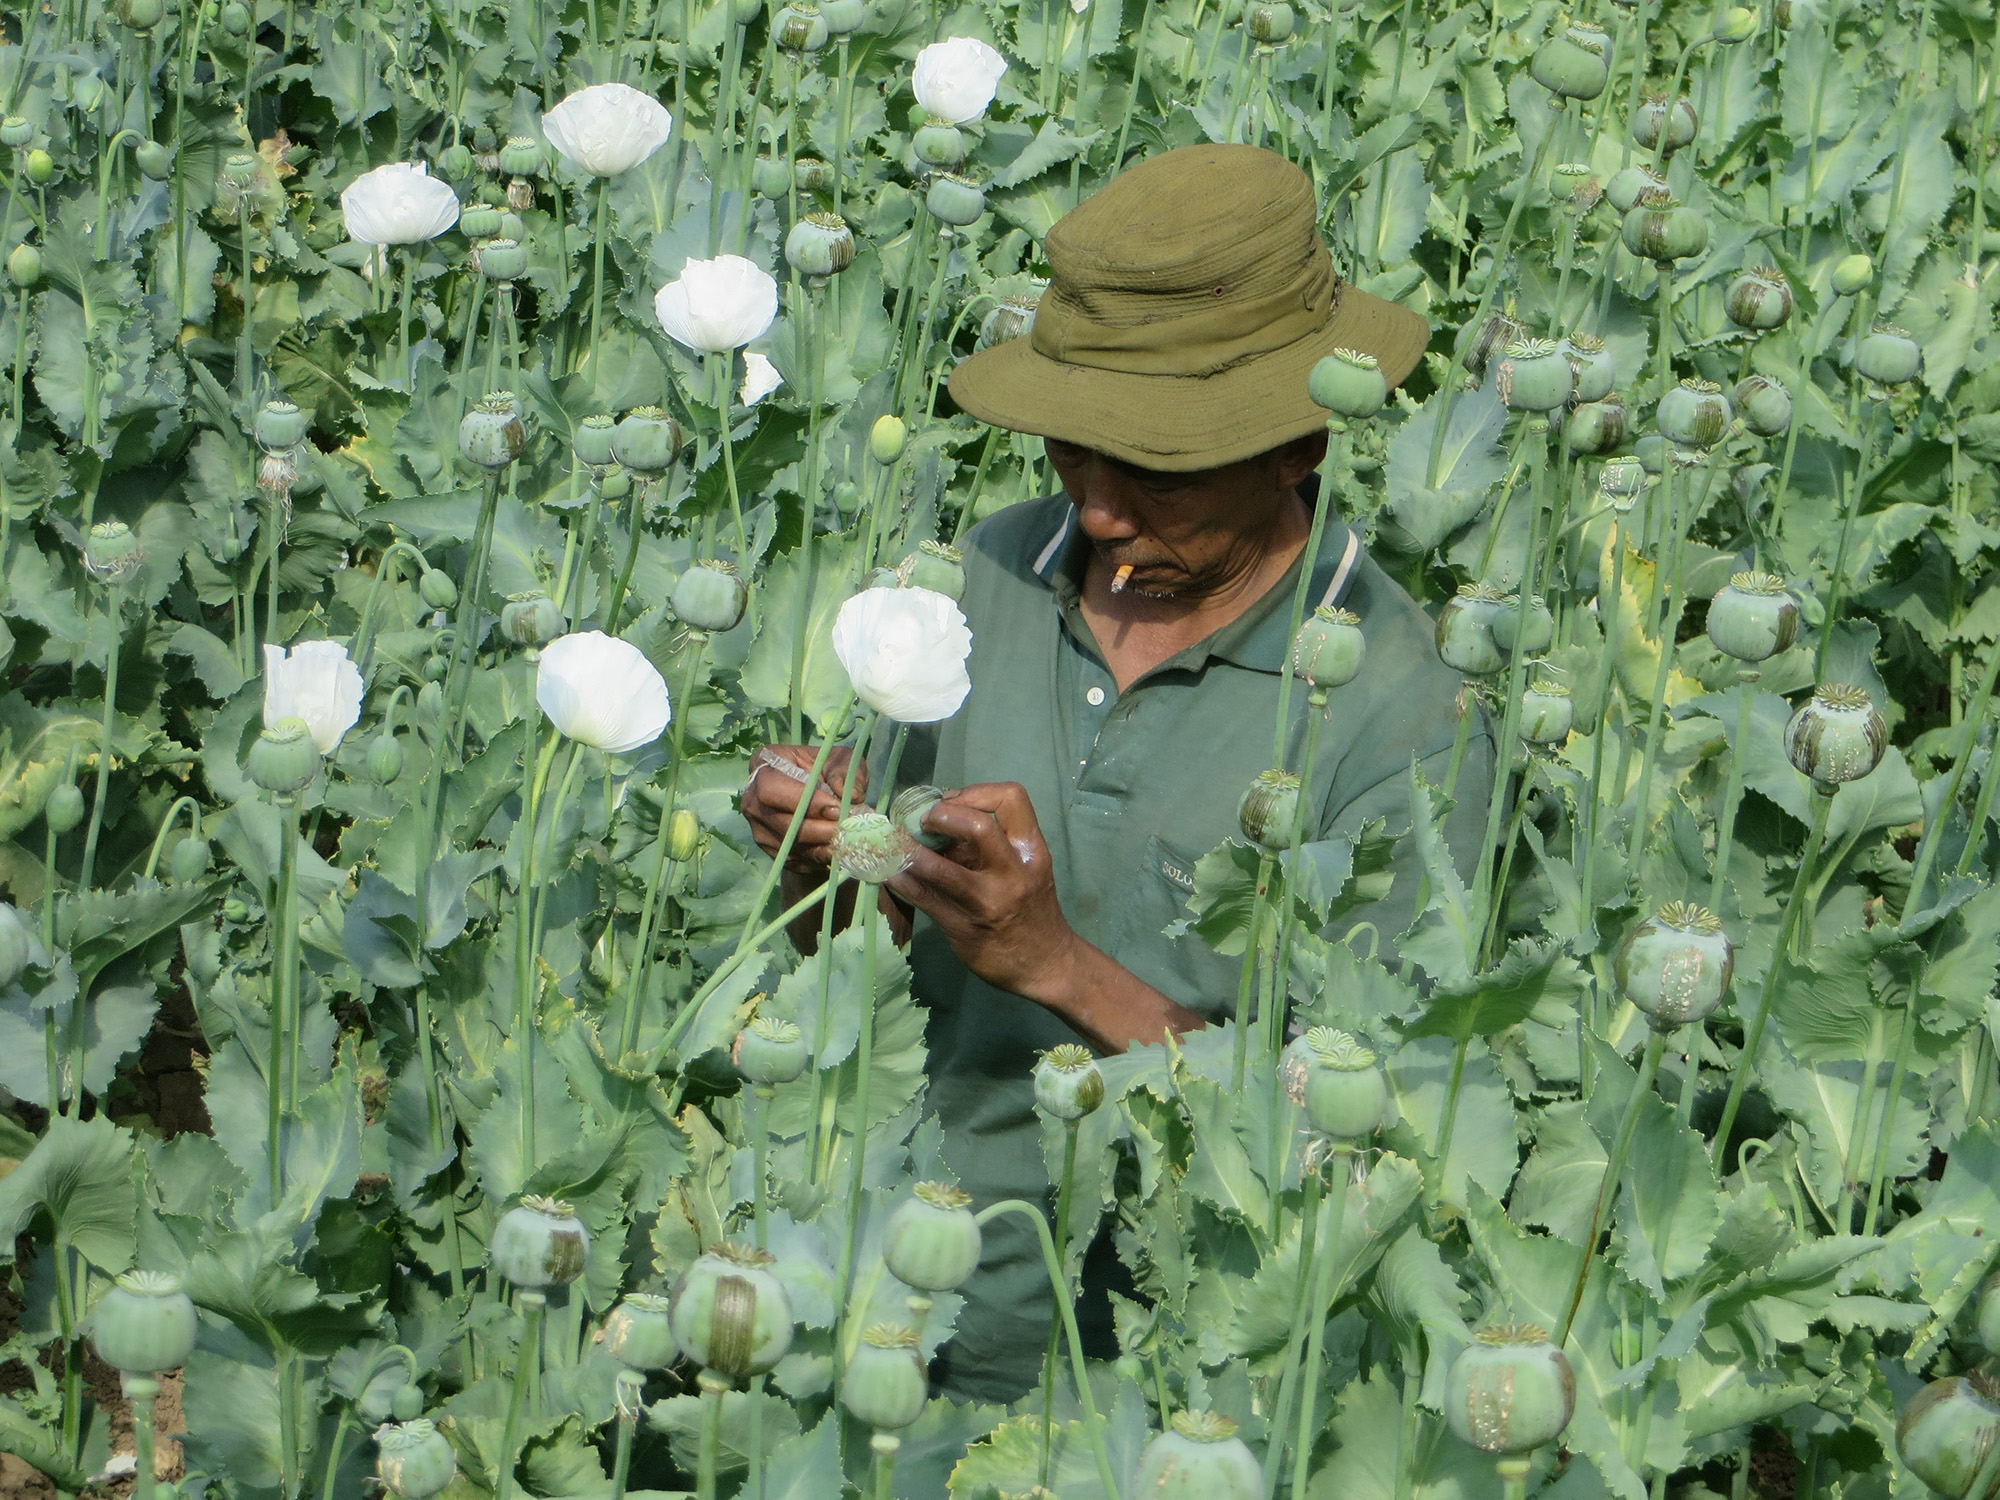 Lancing stage of healthy poppy capsules in Kachin State